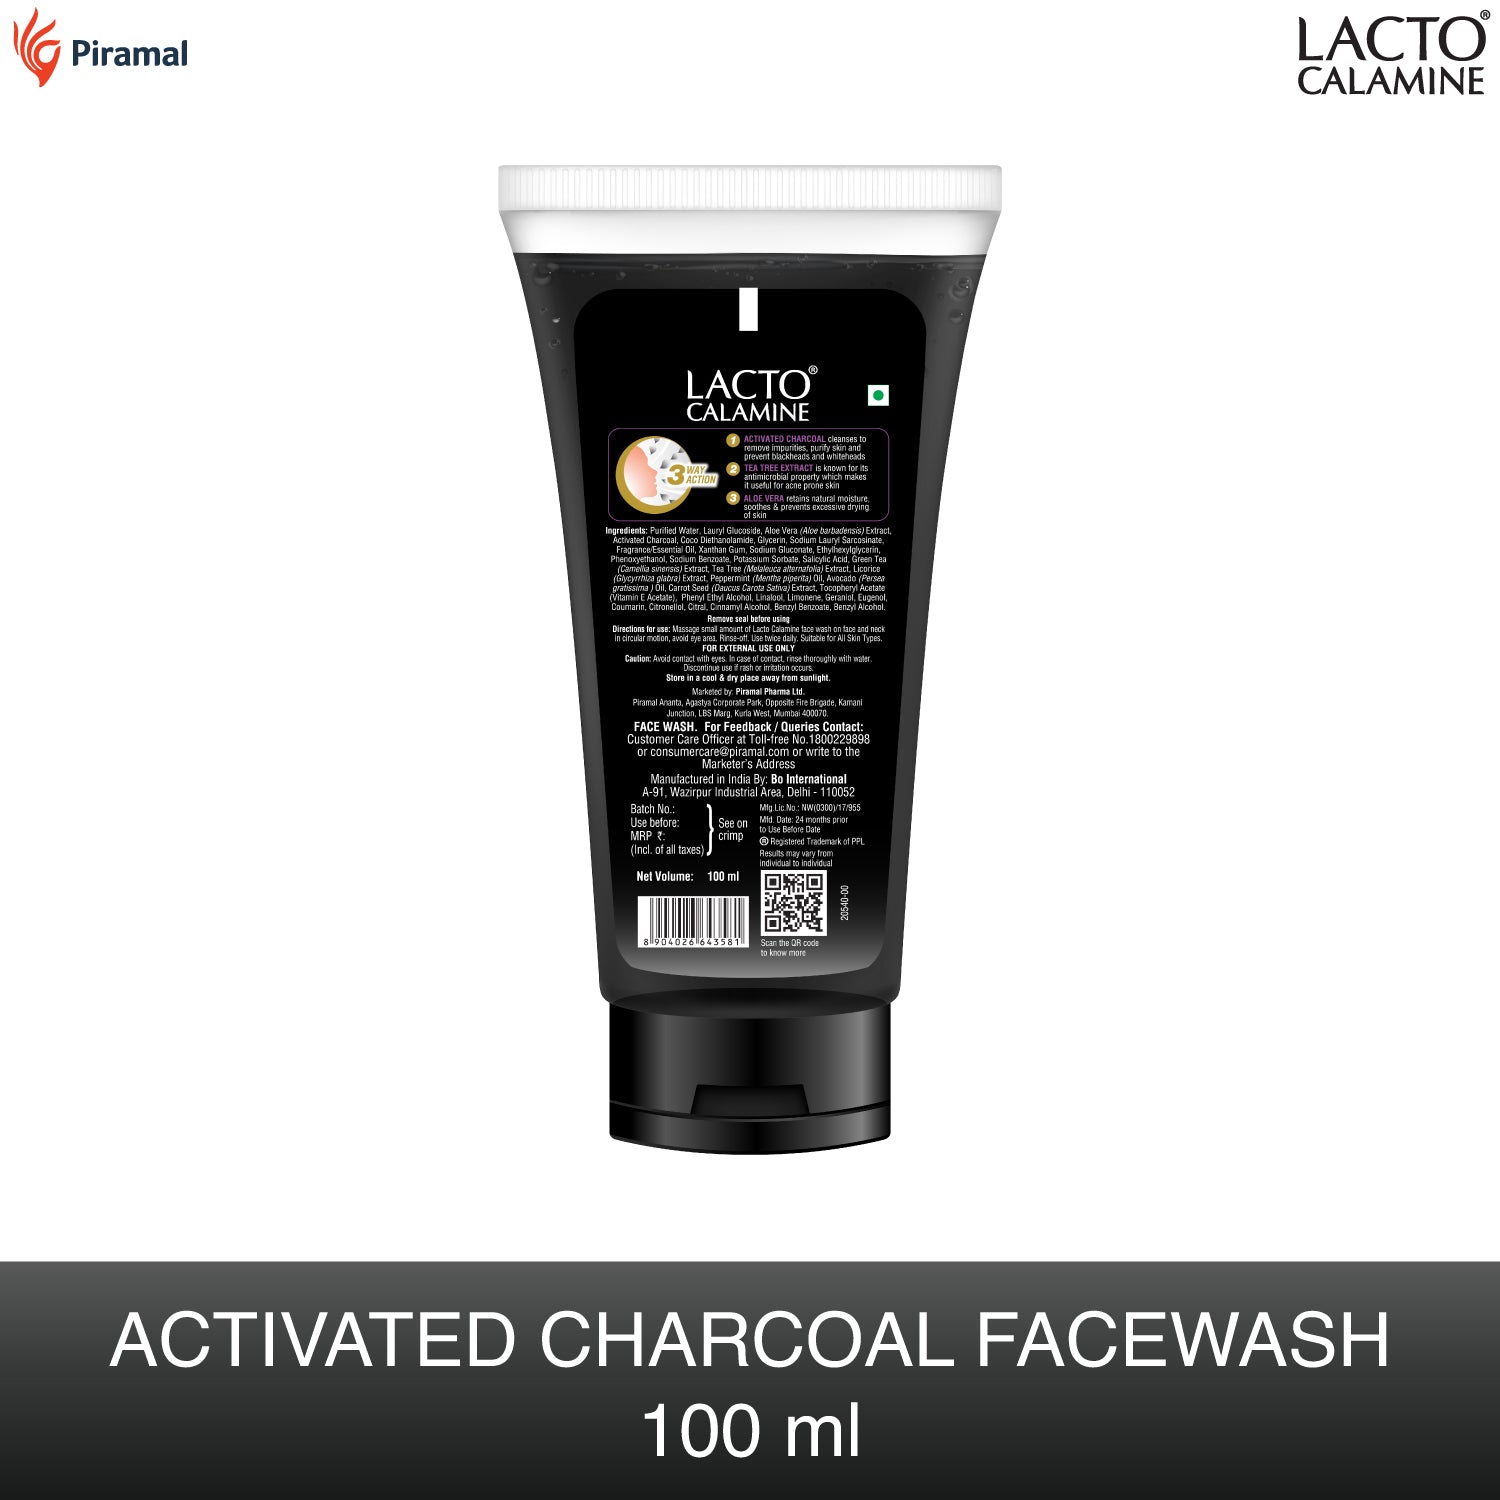 Lacto Calamine Activated Charcoal Face Wash| Contains Aloe Vera & Tea Tree Extract-100ml